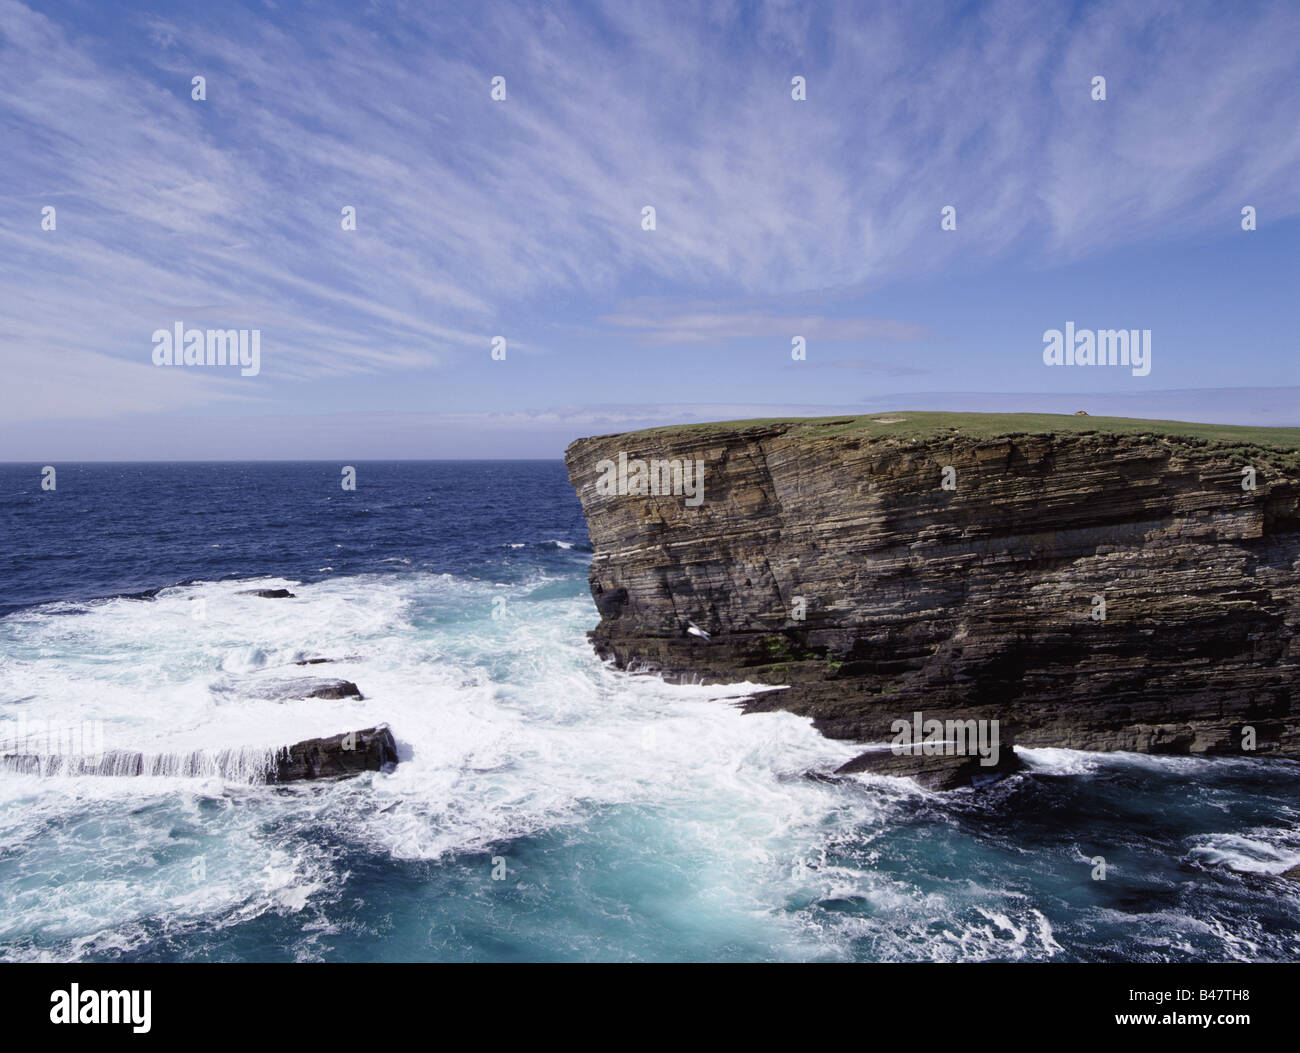 dh Brough of Bigging YESNABY ORKNEY Scotland Sea waves rough seas blue sky cliffs coast cloud windy skies clouds Stock Photo